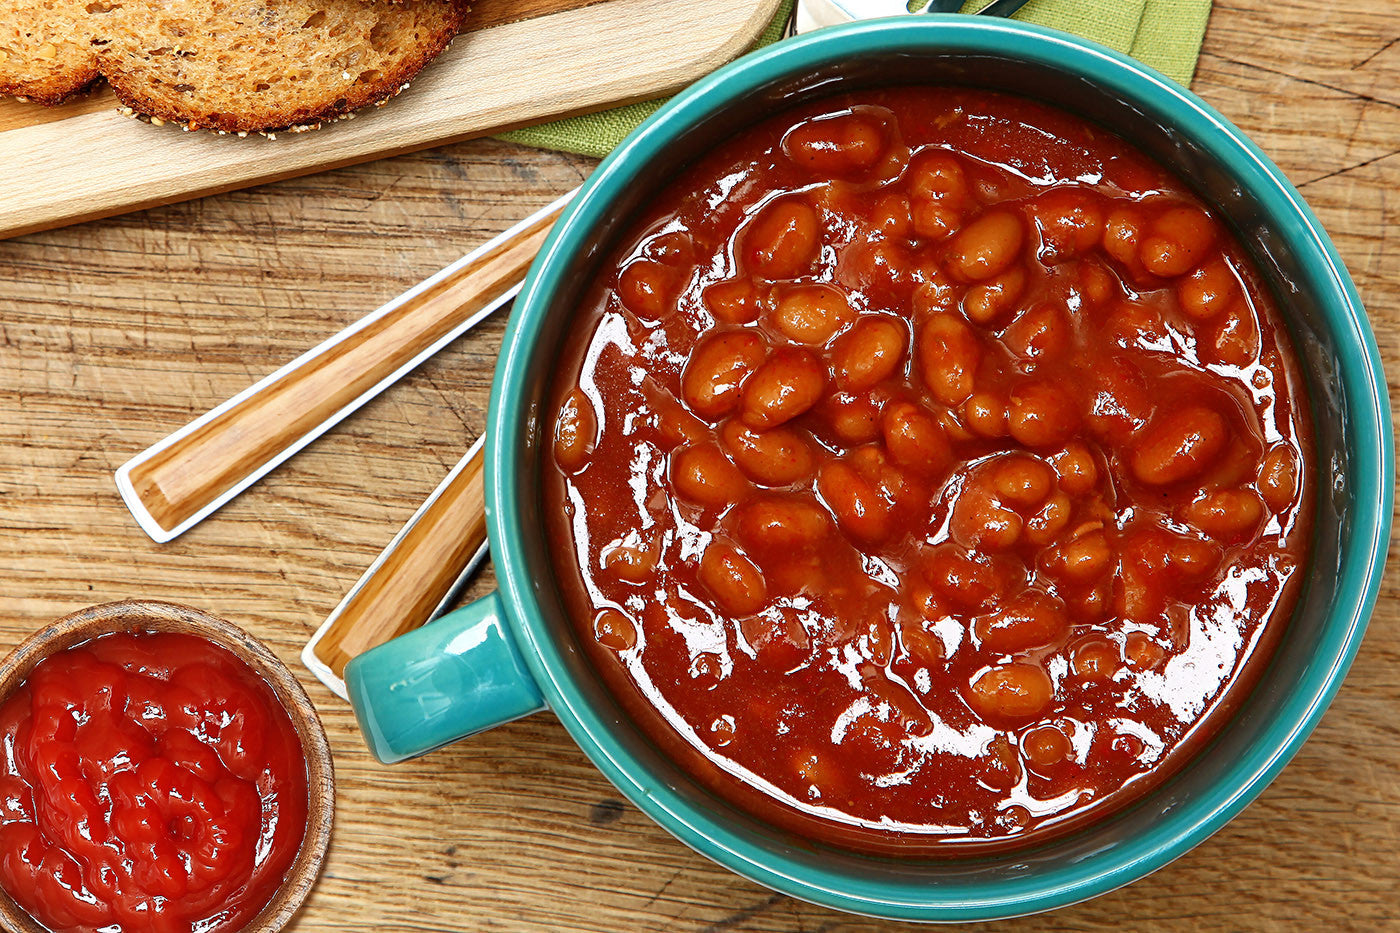 In VitaClay: The Best Baked Beans You've Ever Tasted!